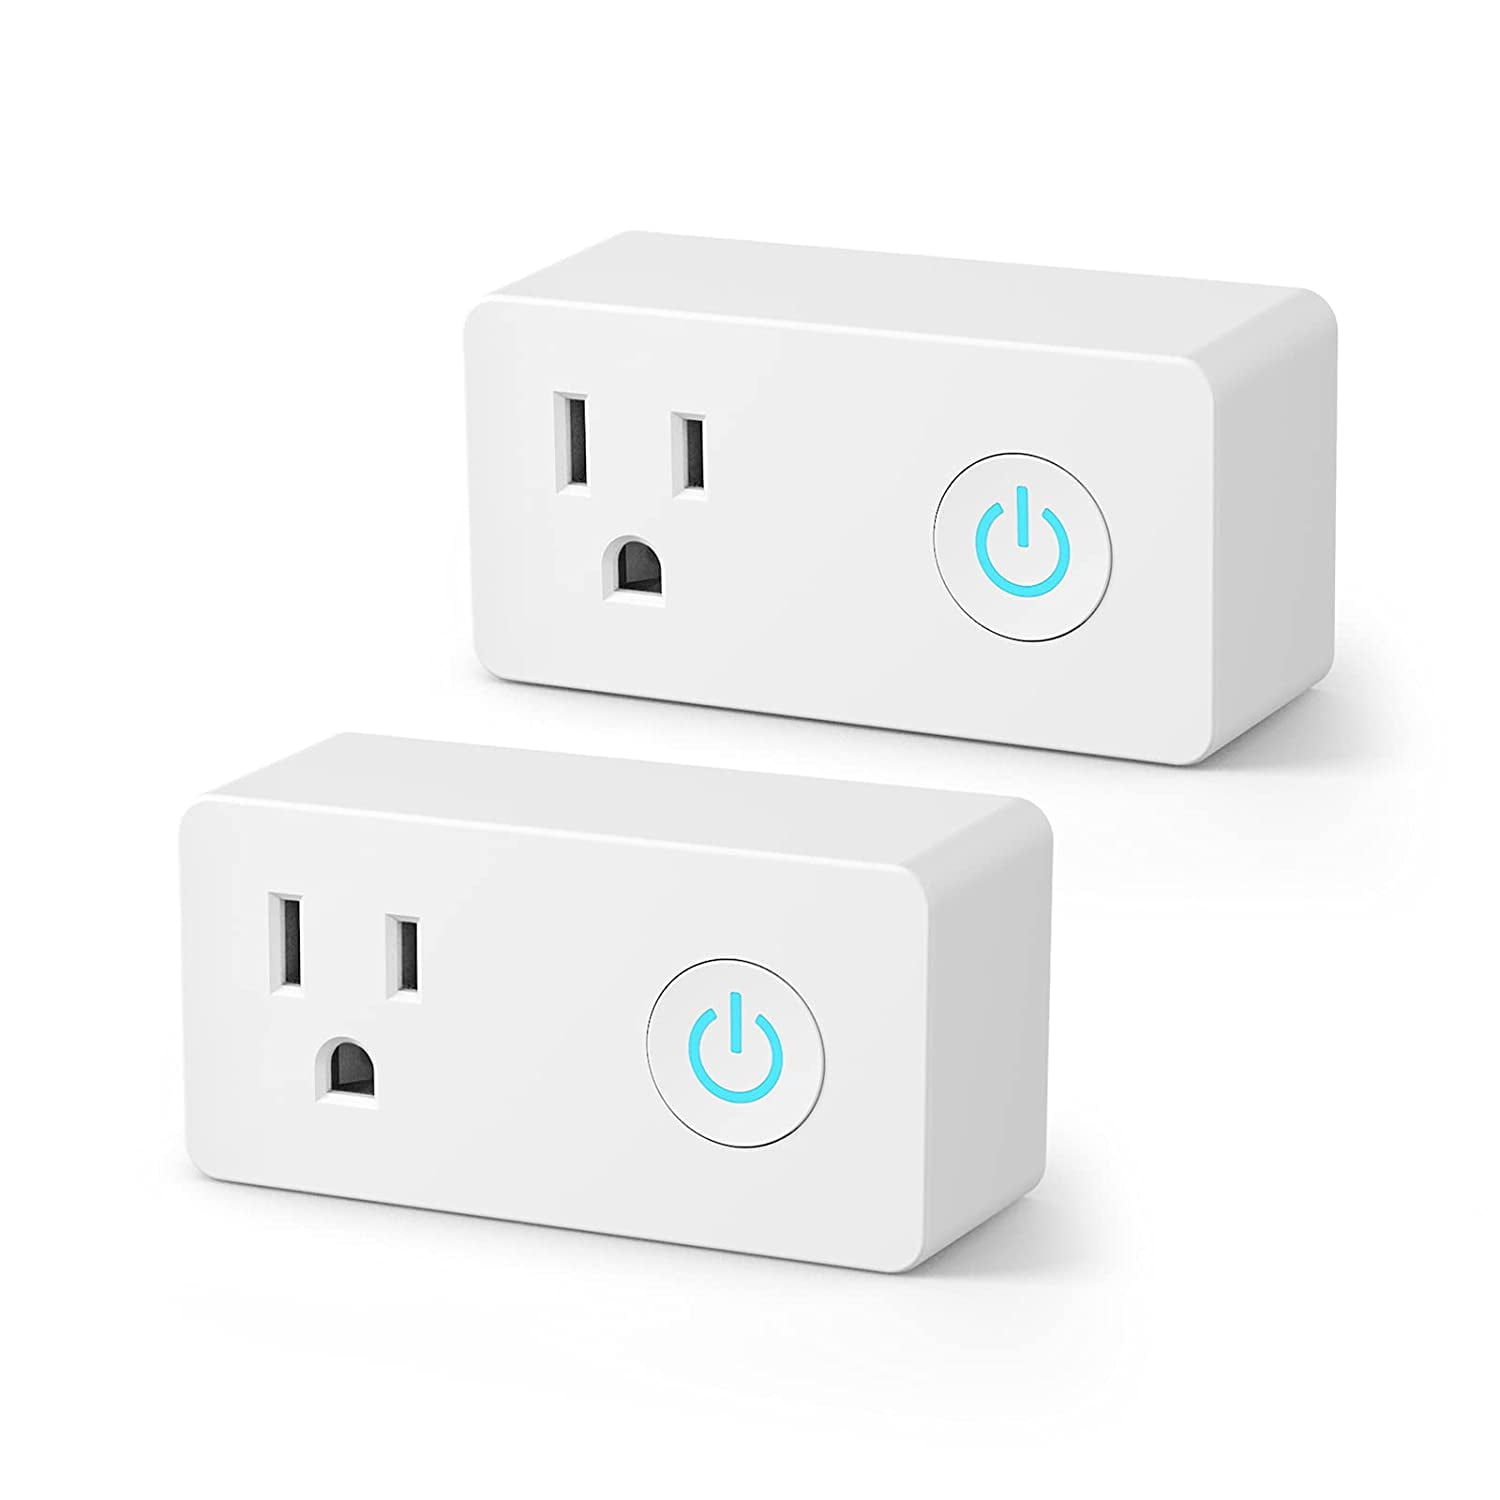 Smart Plug, WGGE Mini Smart WiFi Outlet Compatible with Alexa, Google  Assistant for voice control, Remote control Anywhere, Timer Function, No  Hub